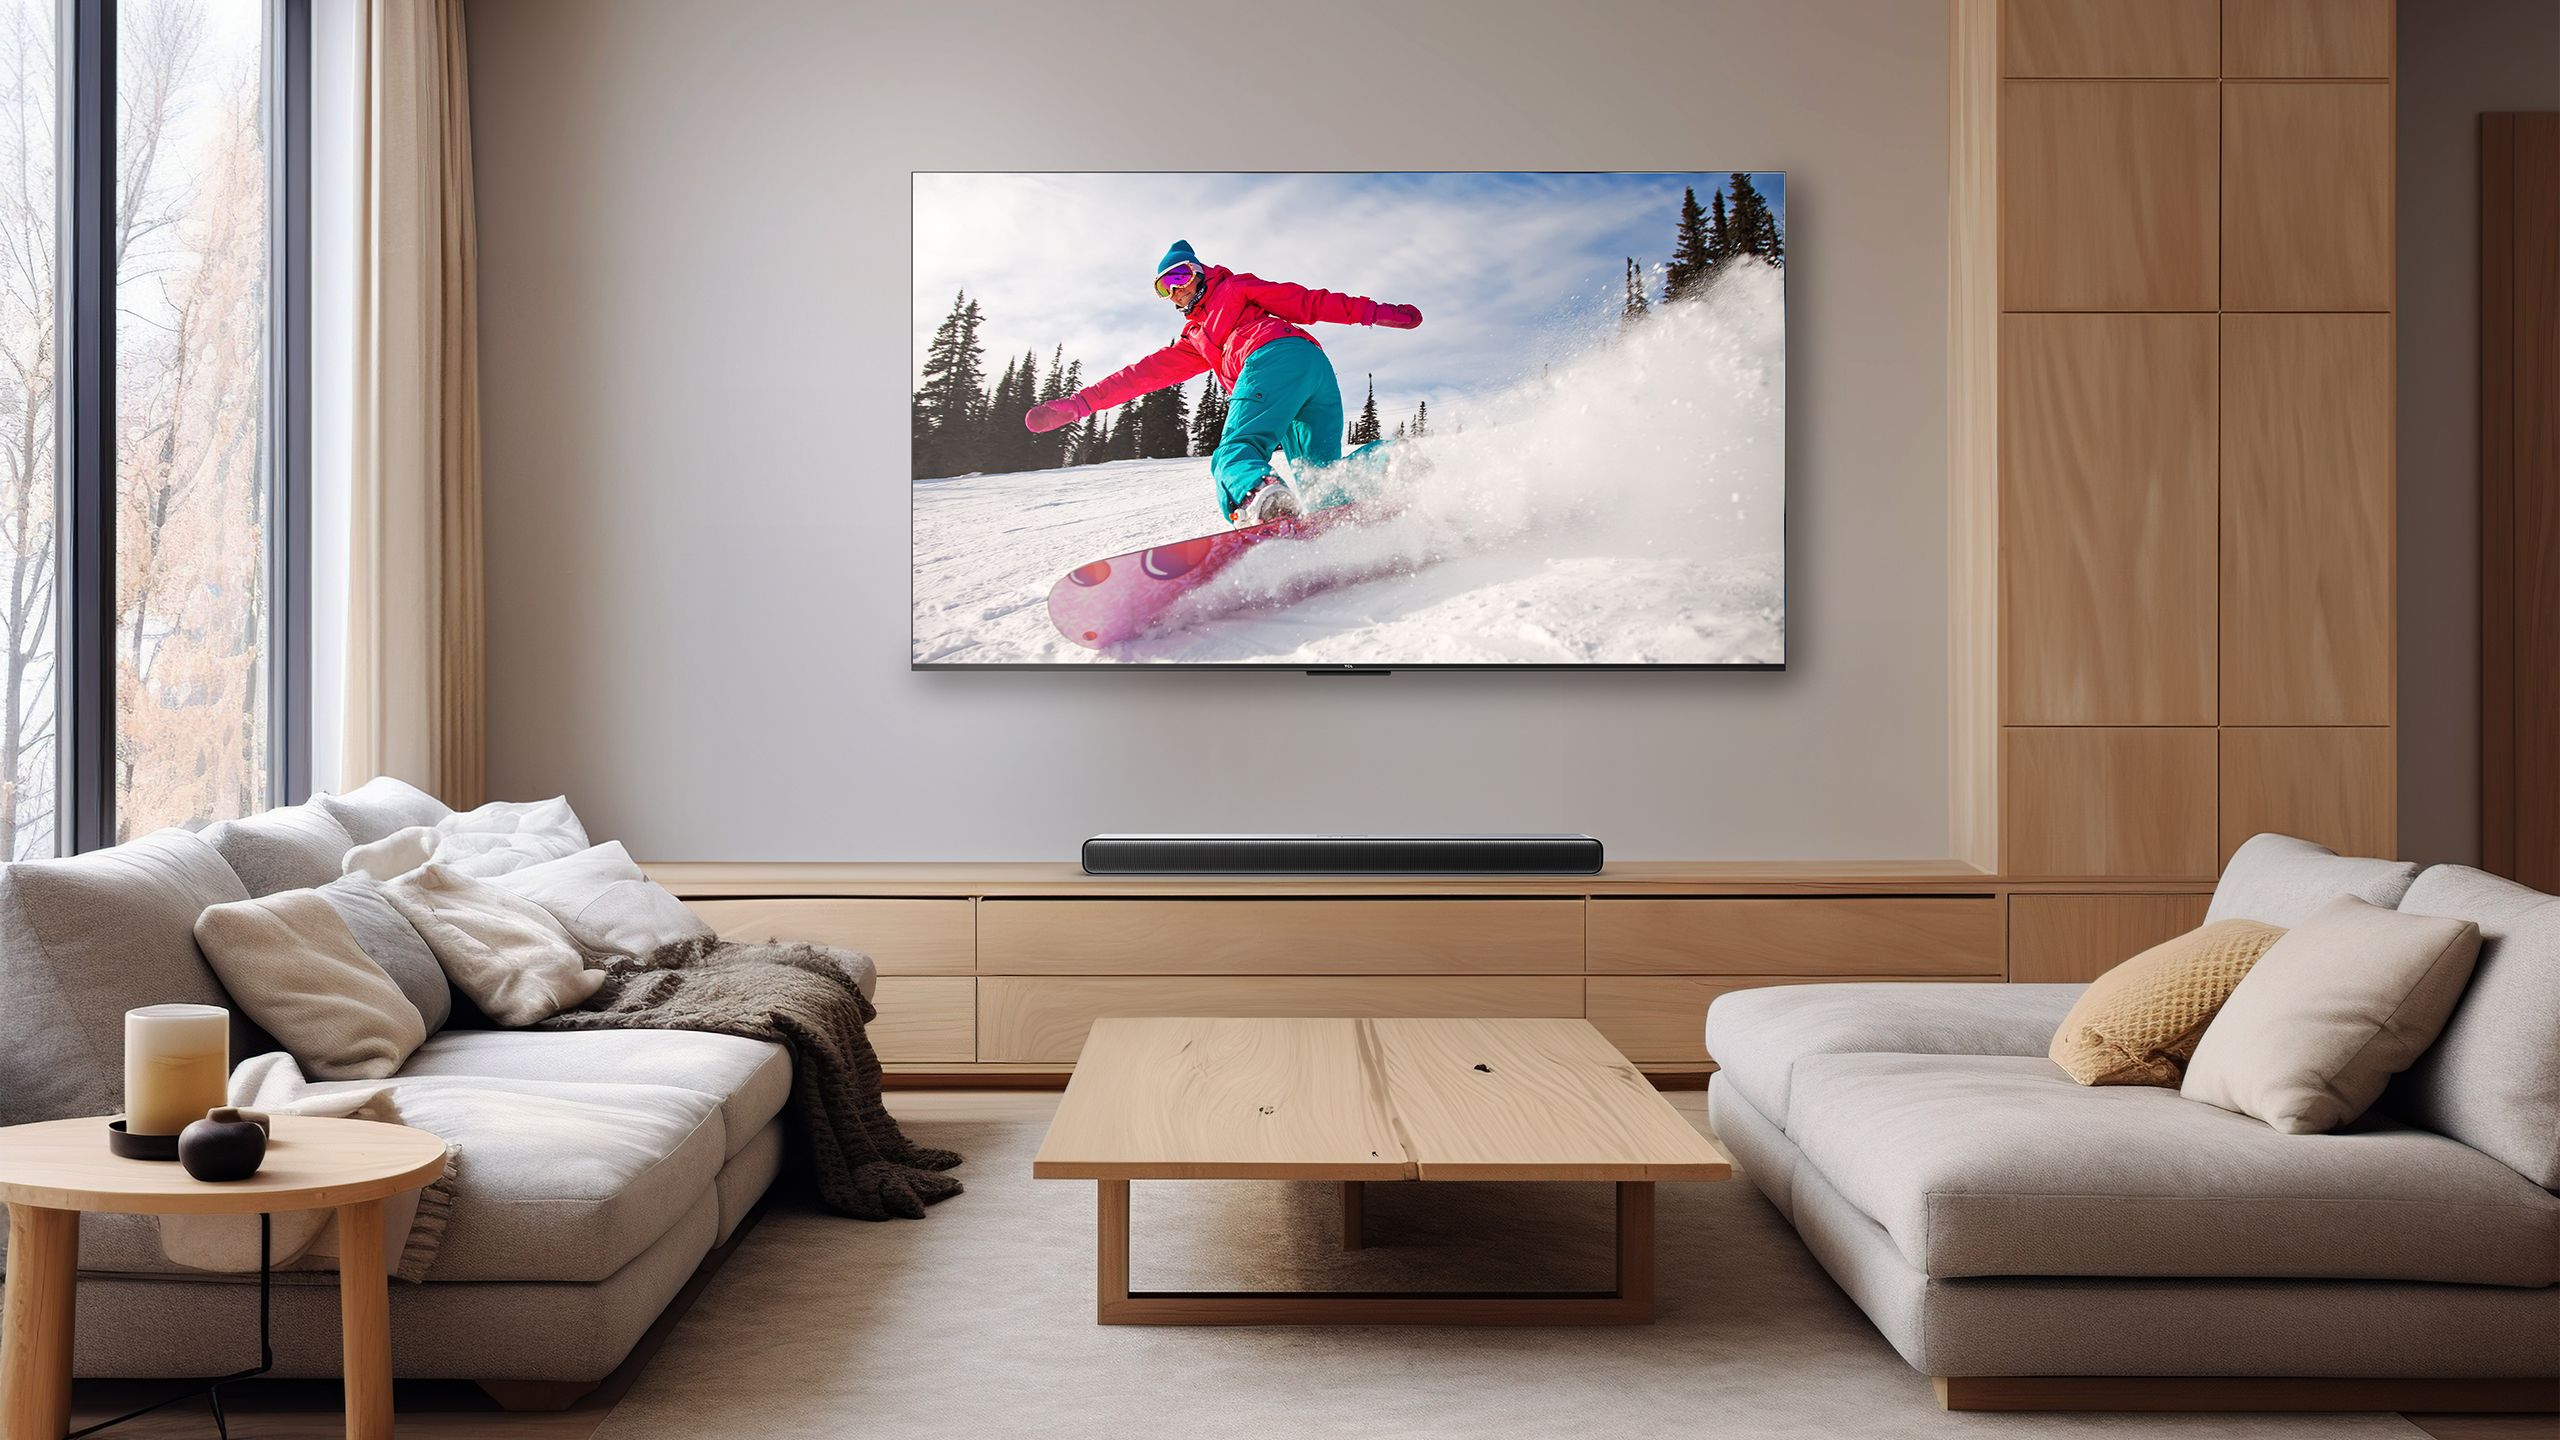 The S45H soundbar on a built-in shelf in a living room with a TV displaying a snowboarder above it. 